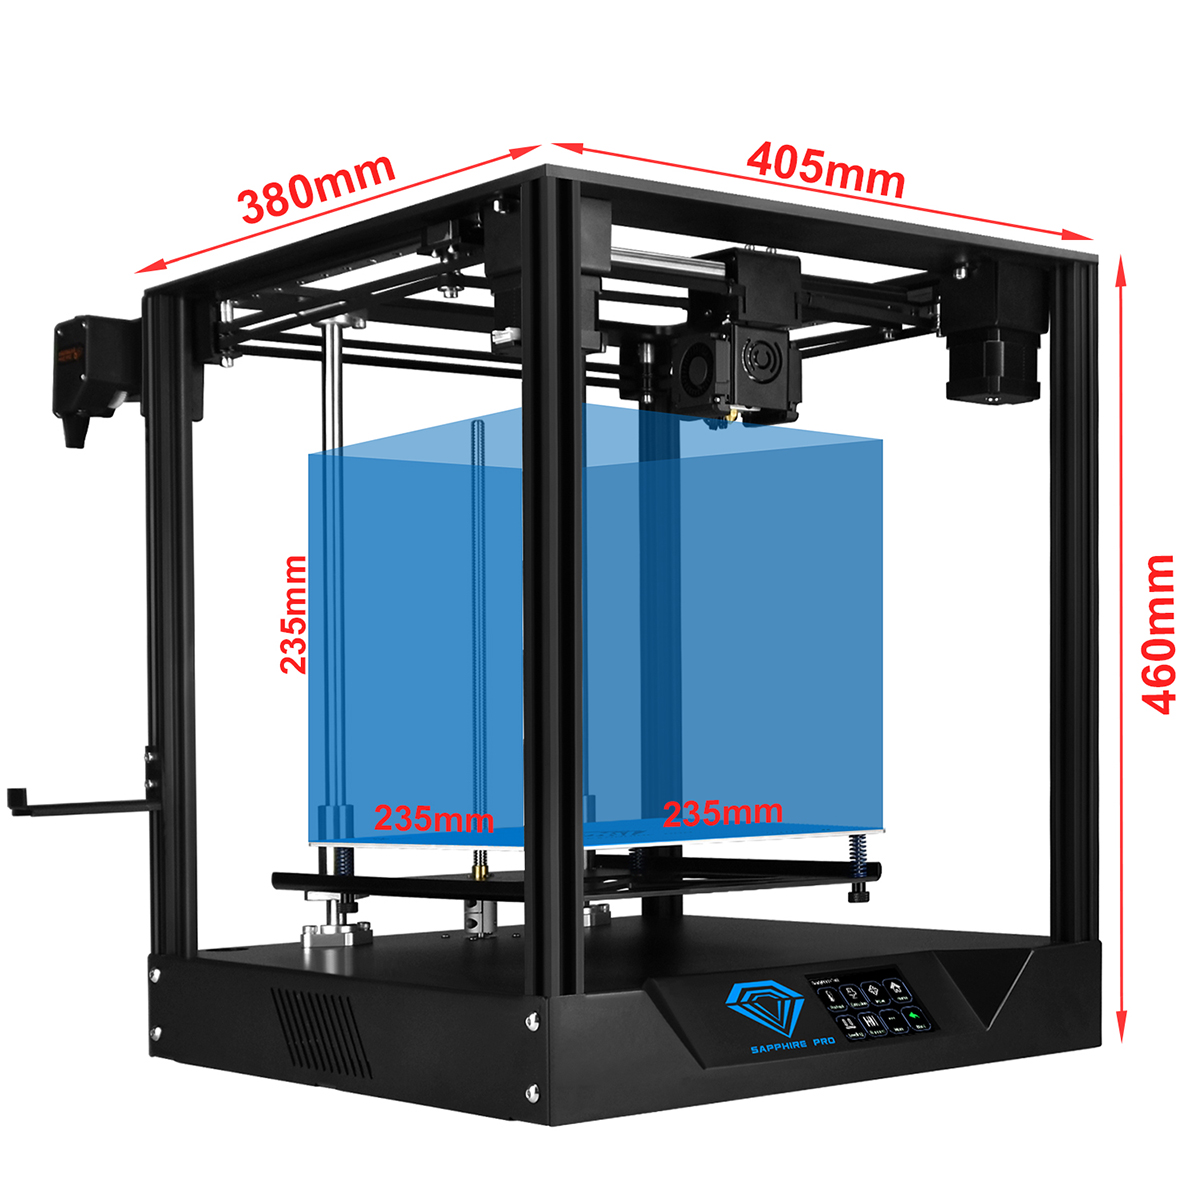 TWO TREES® Sapphire Pro CoreXY DIY 3D Printer Kit 235*235*235mm Printing Size With Dual Drive BMG Extruder / X-axis&Y-axis Linear Guide / Power Re 22